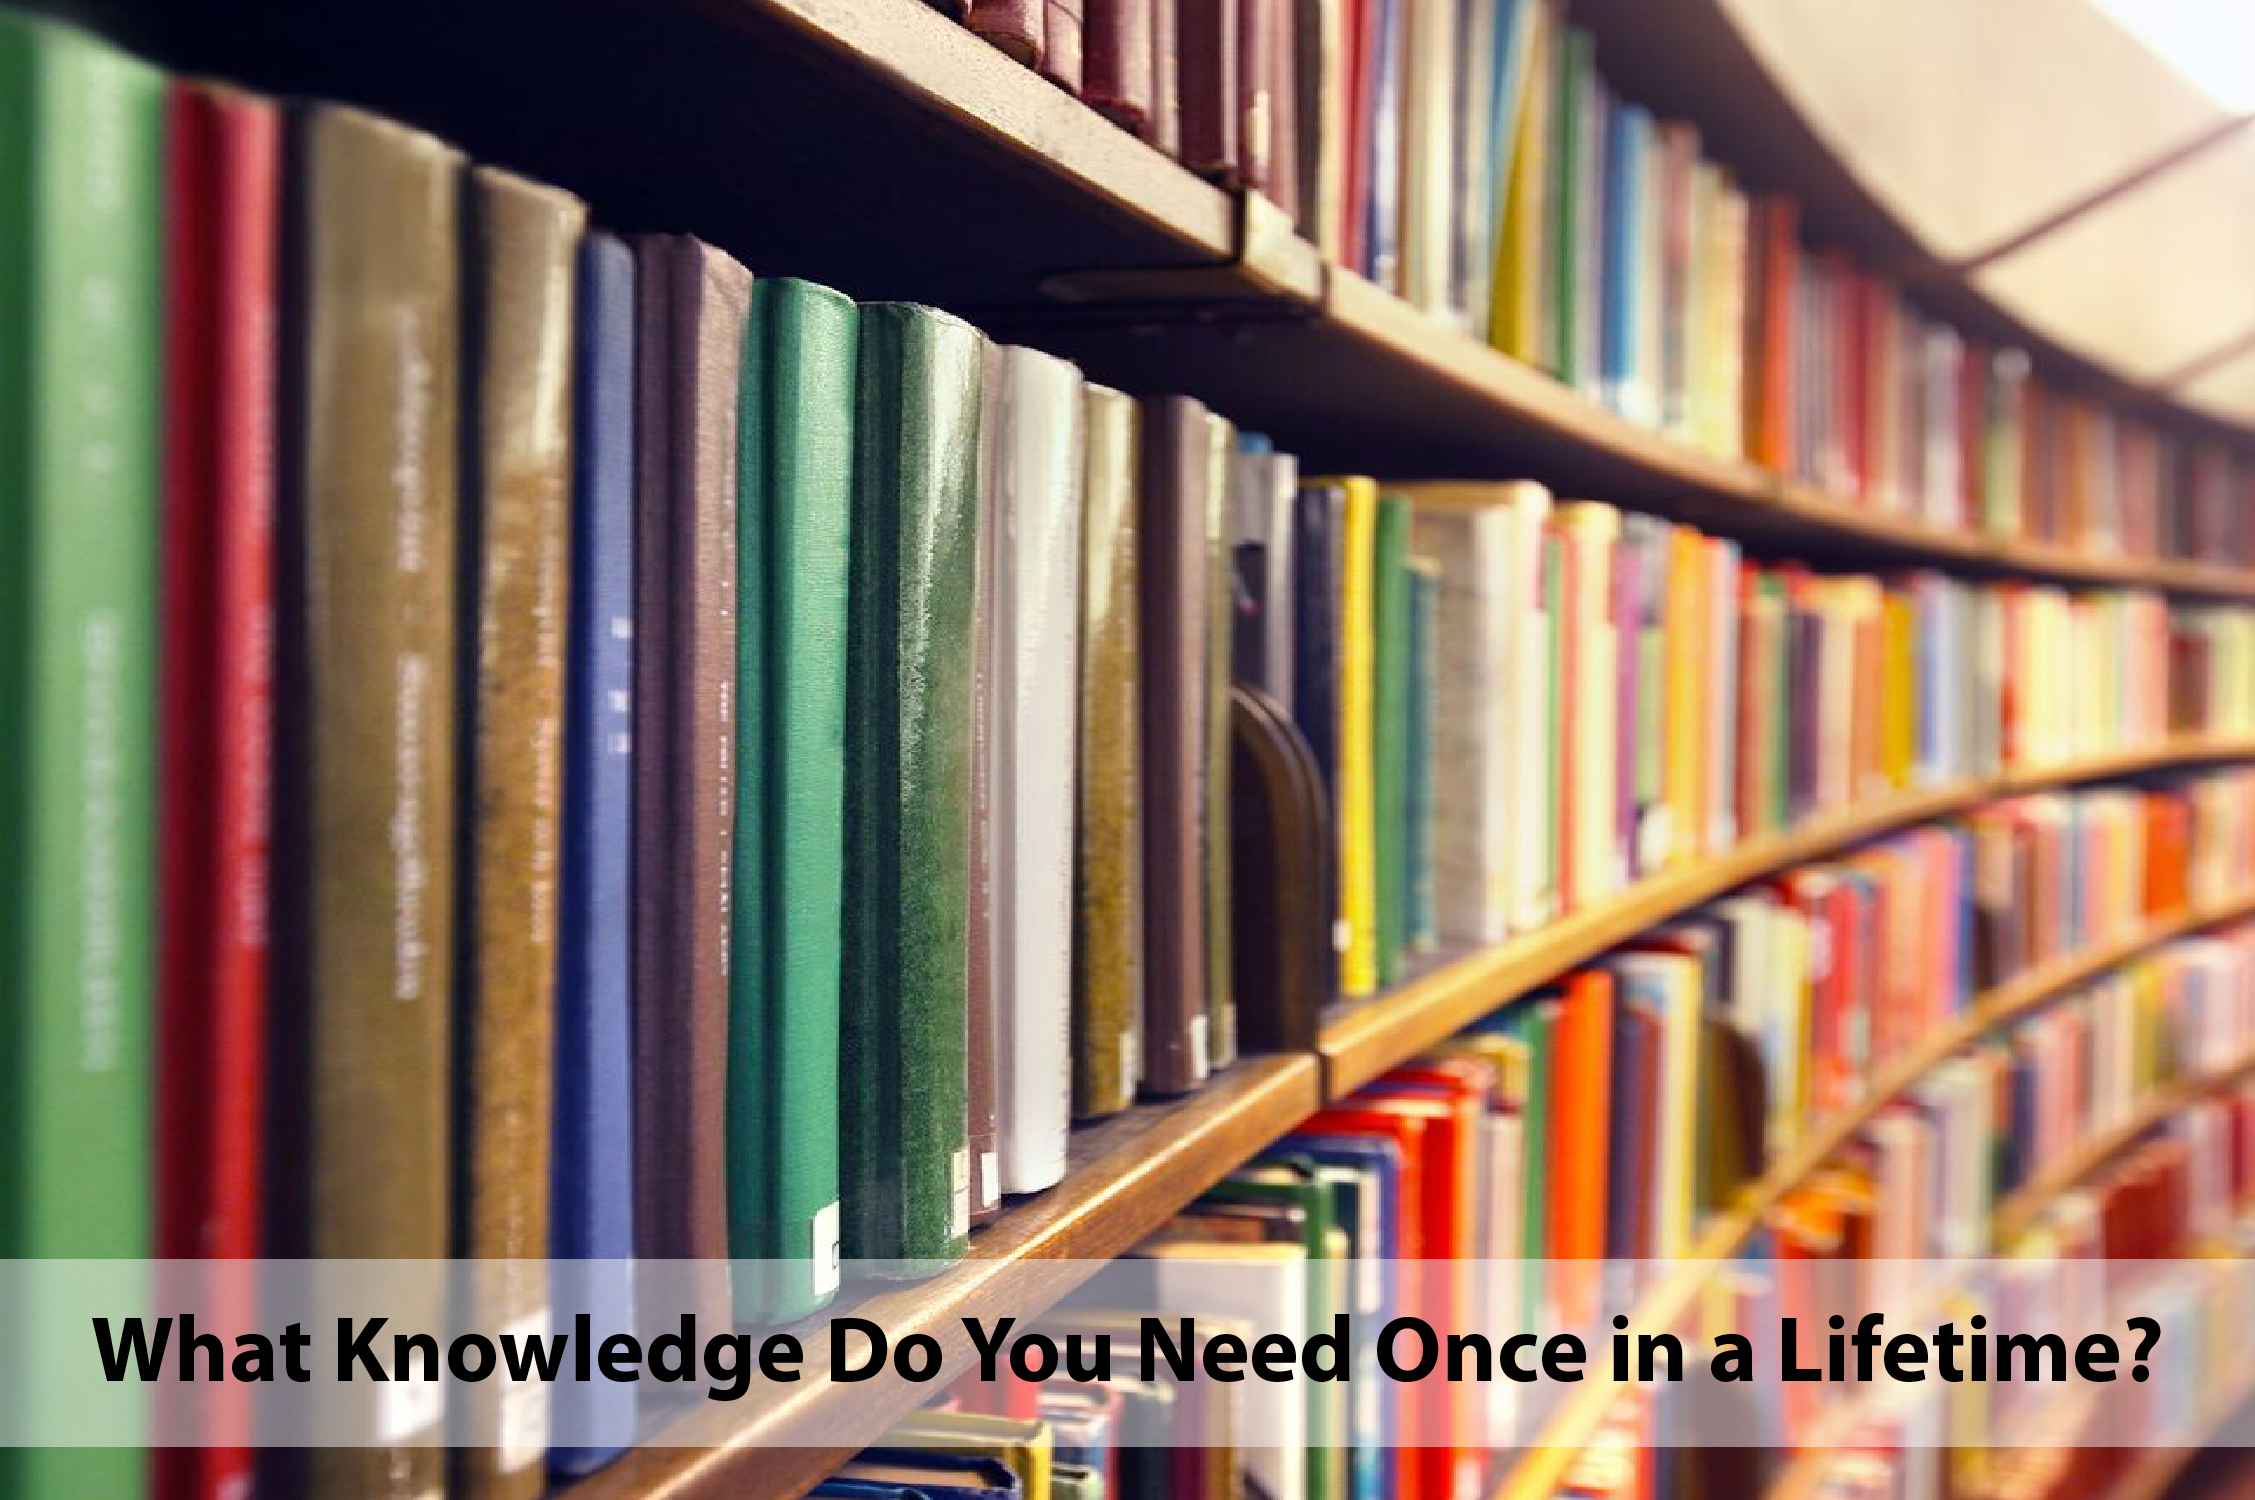 What Knowledge Do You Need Once in a Lifetime?